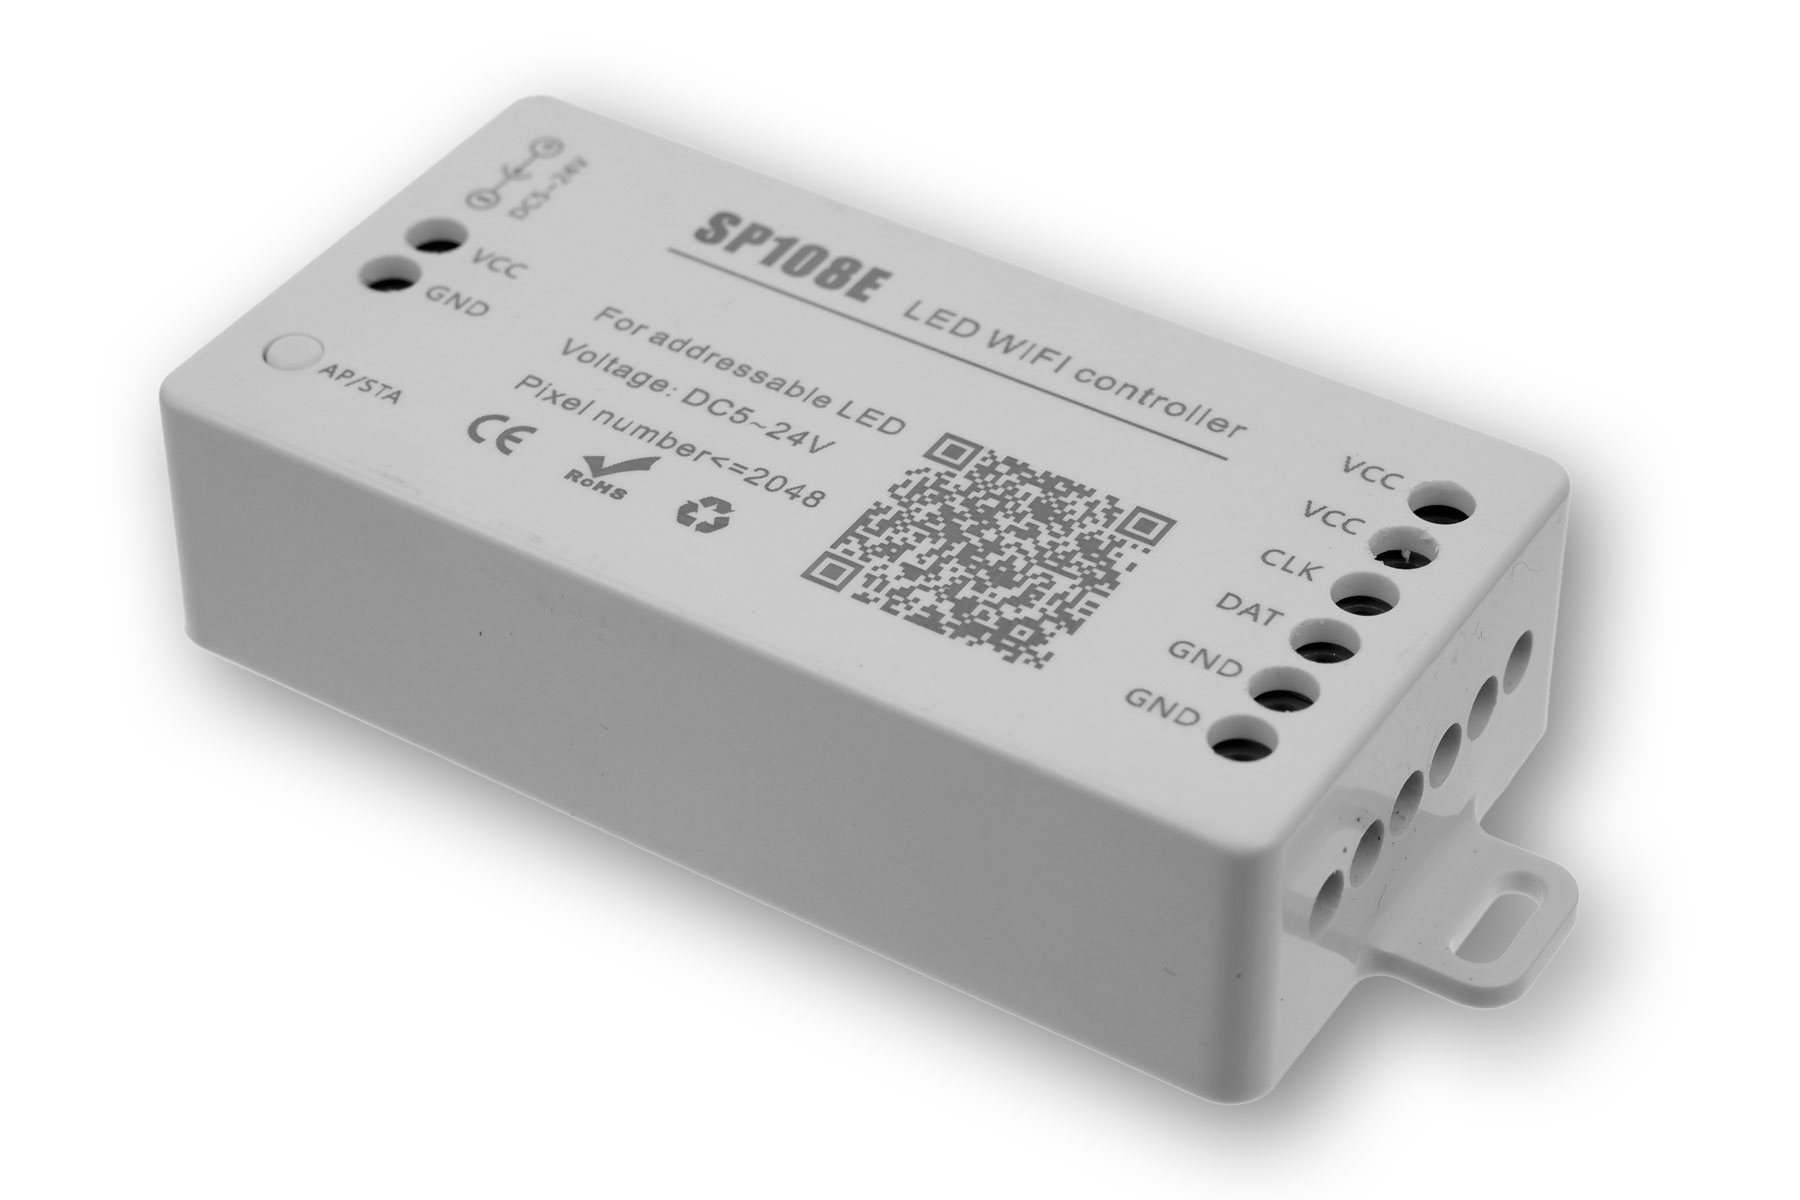 SP108E LED Pixel Controller with App control